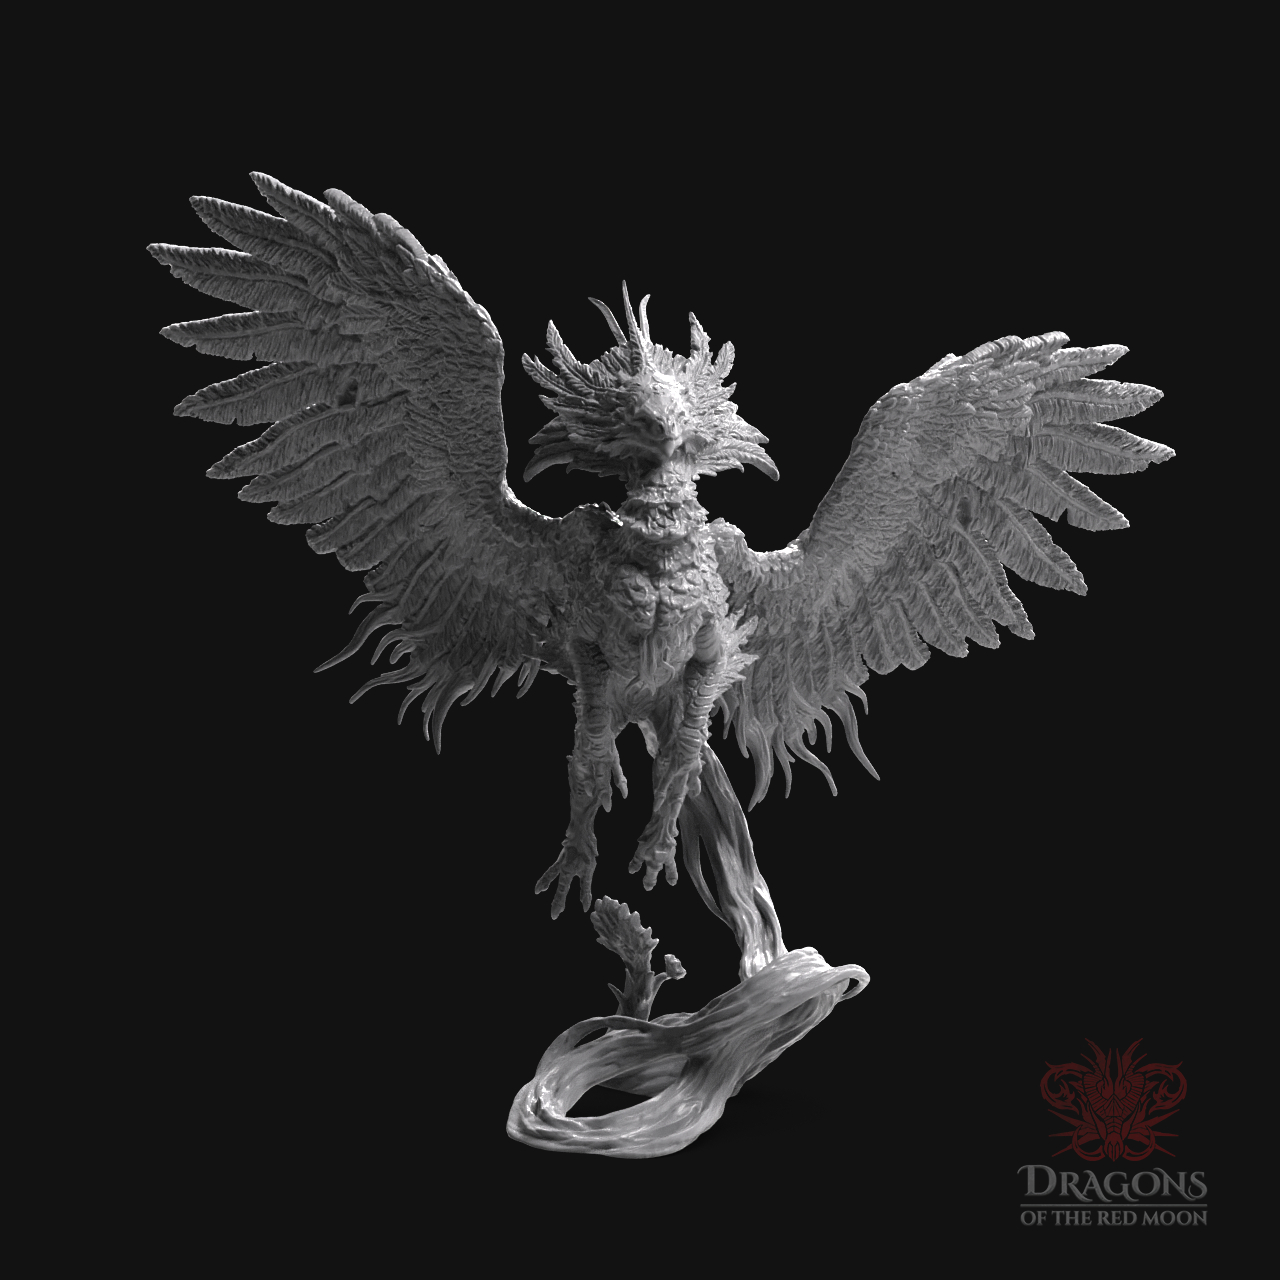 Draco Studios - Kuxcoatl, Arcane of Power. Dragons of the Red Moon's 200mm  miniatures are available in our LIVE Kickstarter campaign along with  Baastherox' Adventure FREE SAMPLE. Pledge here:   #kickstartergames #rpg #